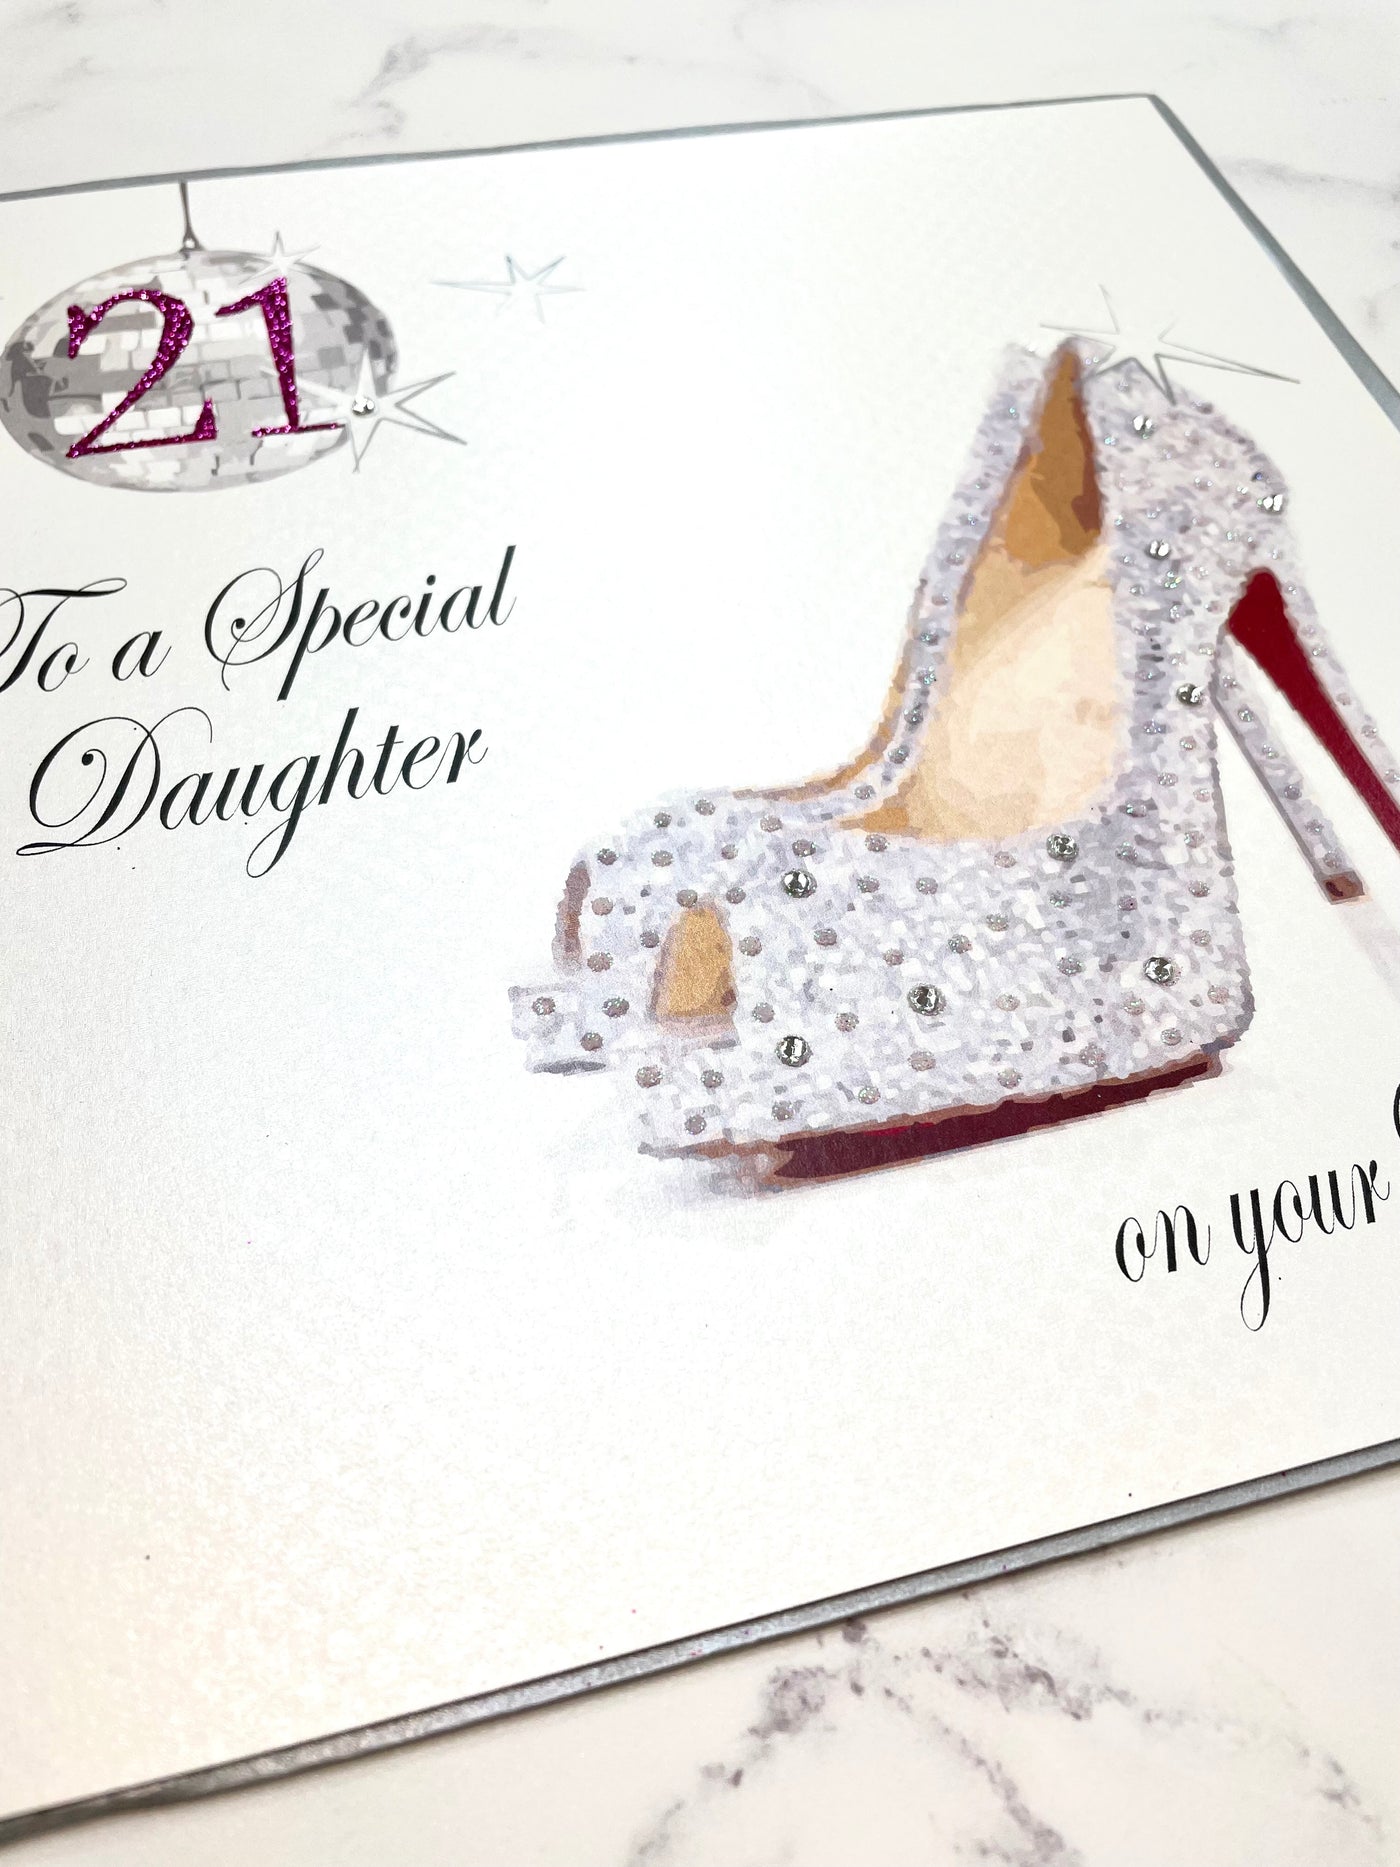 White Cotton Cards Special Daughter 21st Birthday Shoe LARGE Card